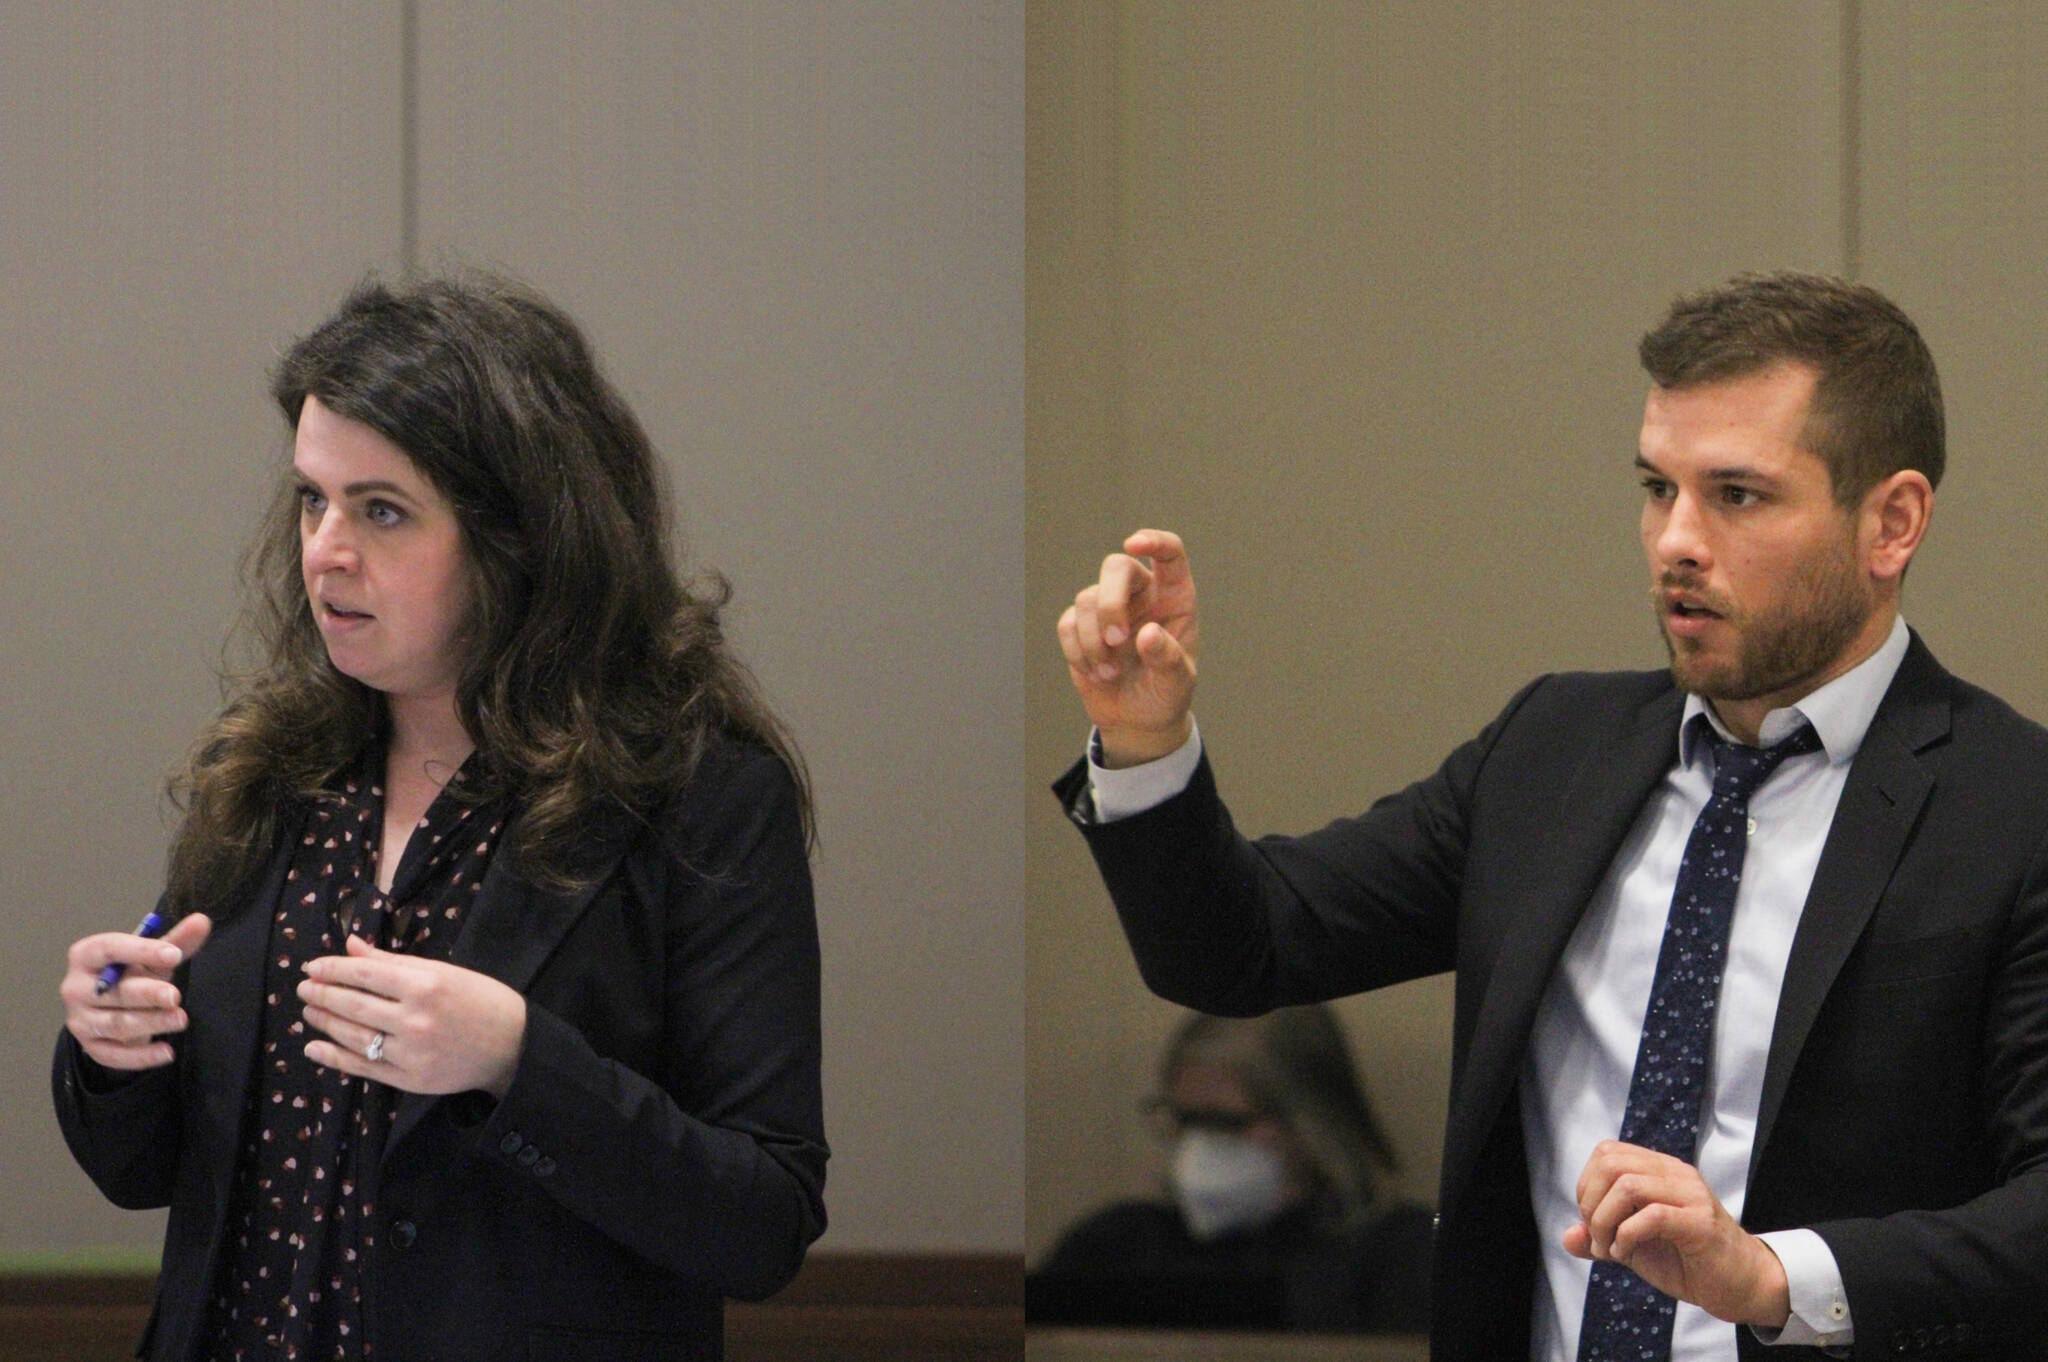 In this composited picture, a prosecuting attorney (left) and Patrick Nicholas’ defense attorney (right) argue over pre-trial motions during the first day scheduled in the trial against Nicholas, accused of the 1991 murder of Sarah Yarborough in Federal Way. Judge Josephine Wiggs asked attending news media reporters not to photograph Nicholas in court at this time, as jury selection has not yet begun. Alex Bruell /Sound Publishing